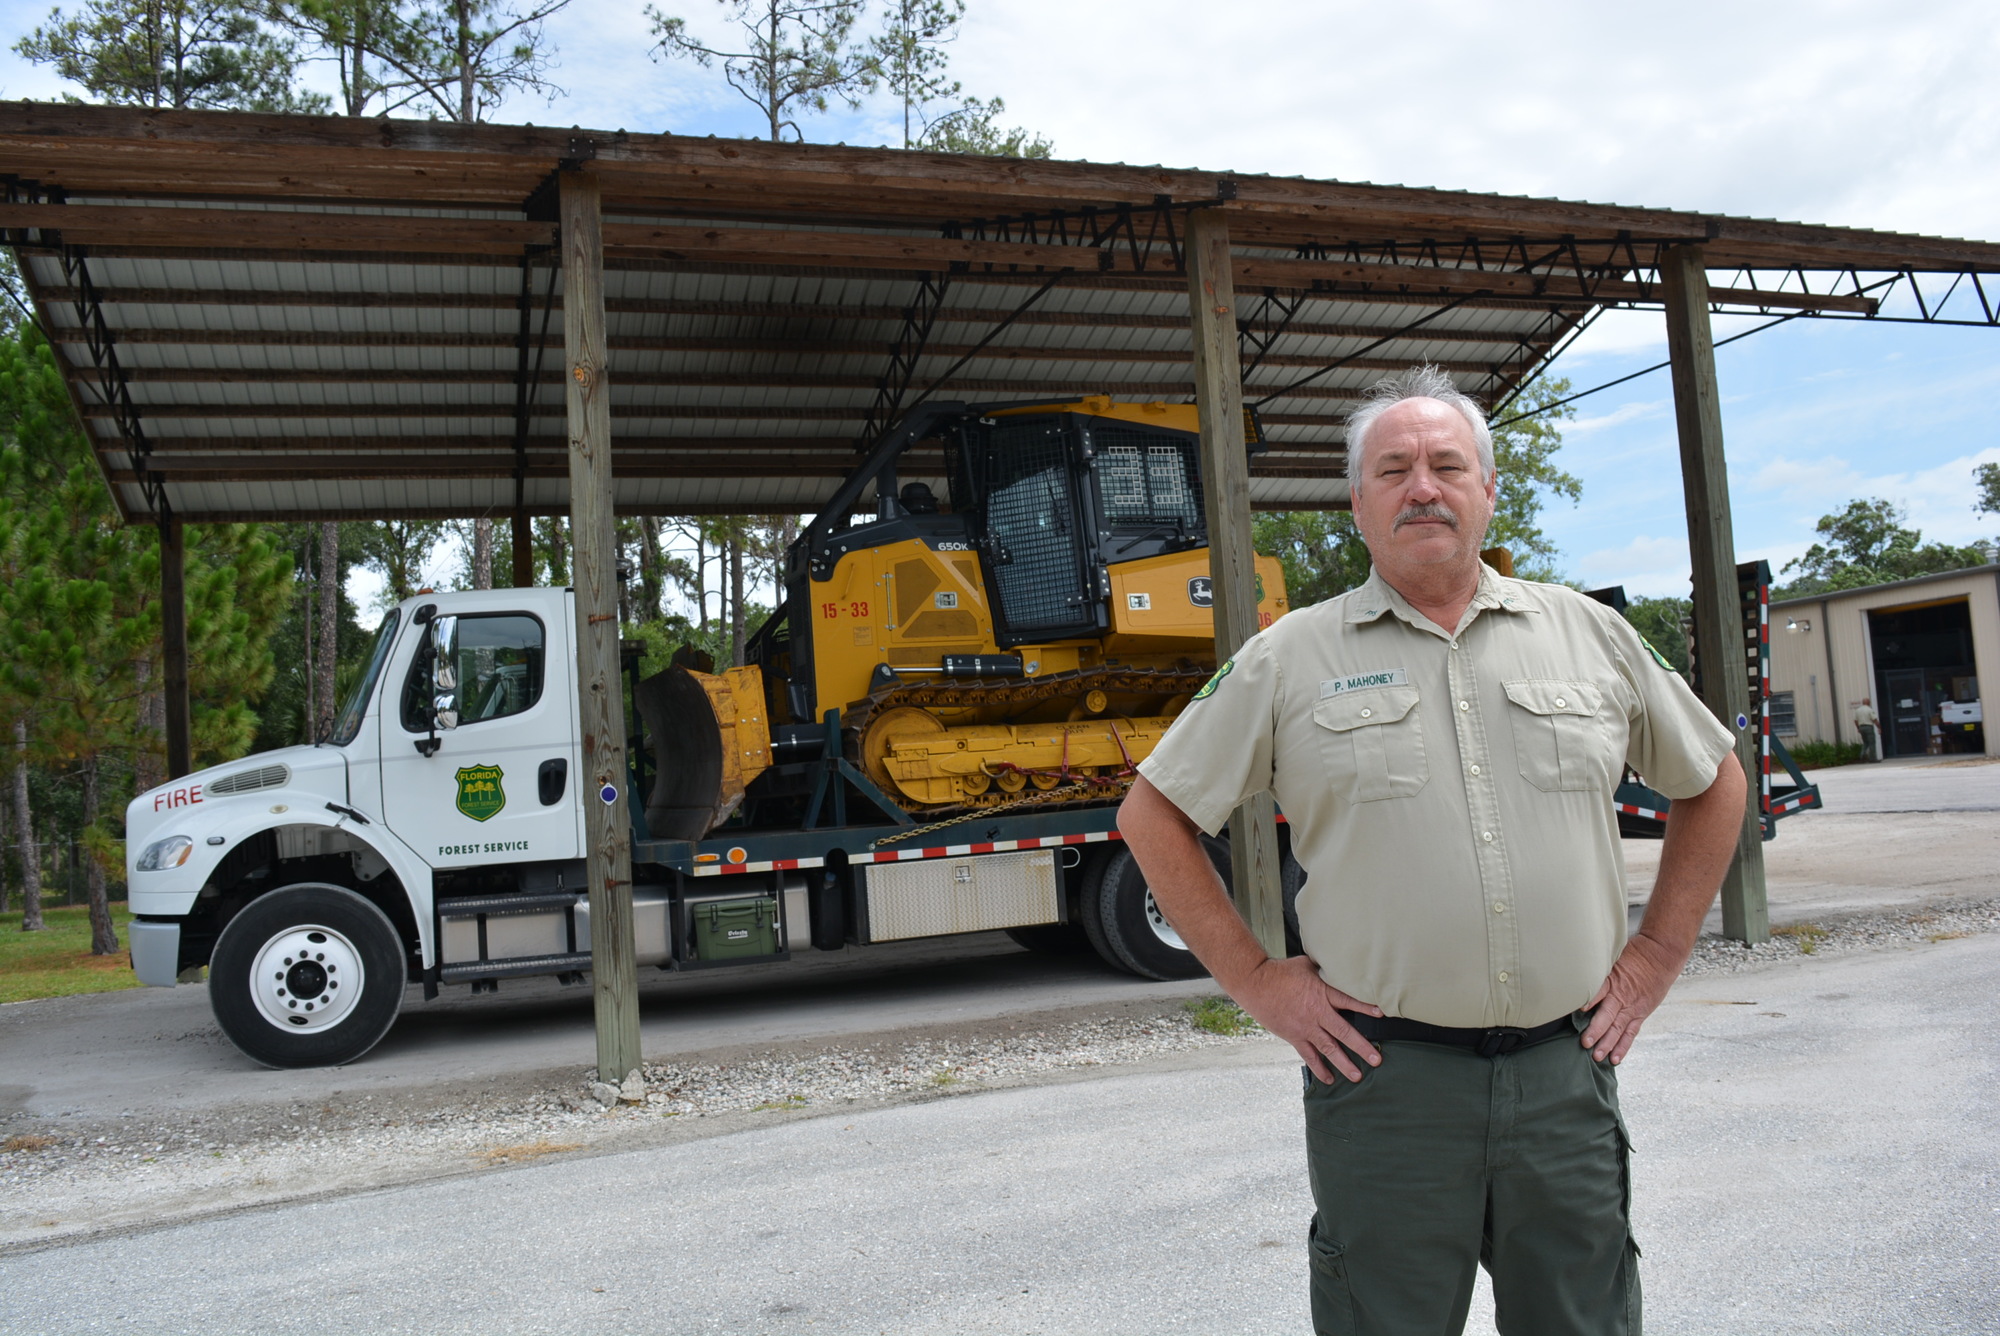 Florida Fire Service Myakka River District Public Information Officer Patrick Mahoney said the service uses tractors to clear paths for brush trucks or to help prevent fires from spreading.